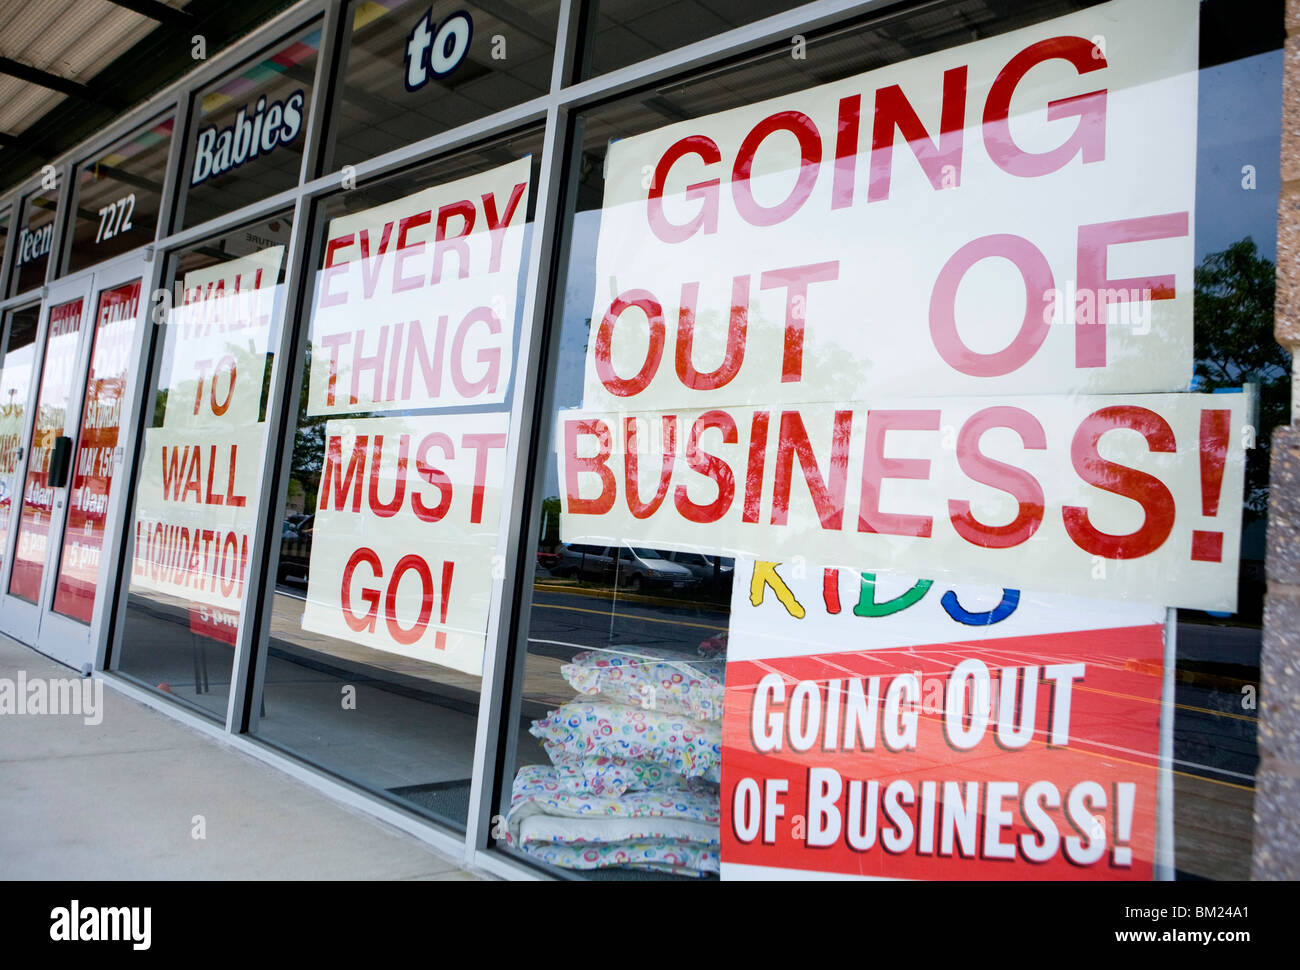 Going out of business and sale signs at a retail store Stock Photo